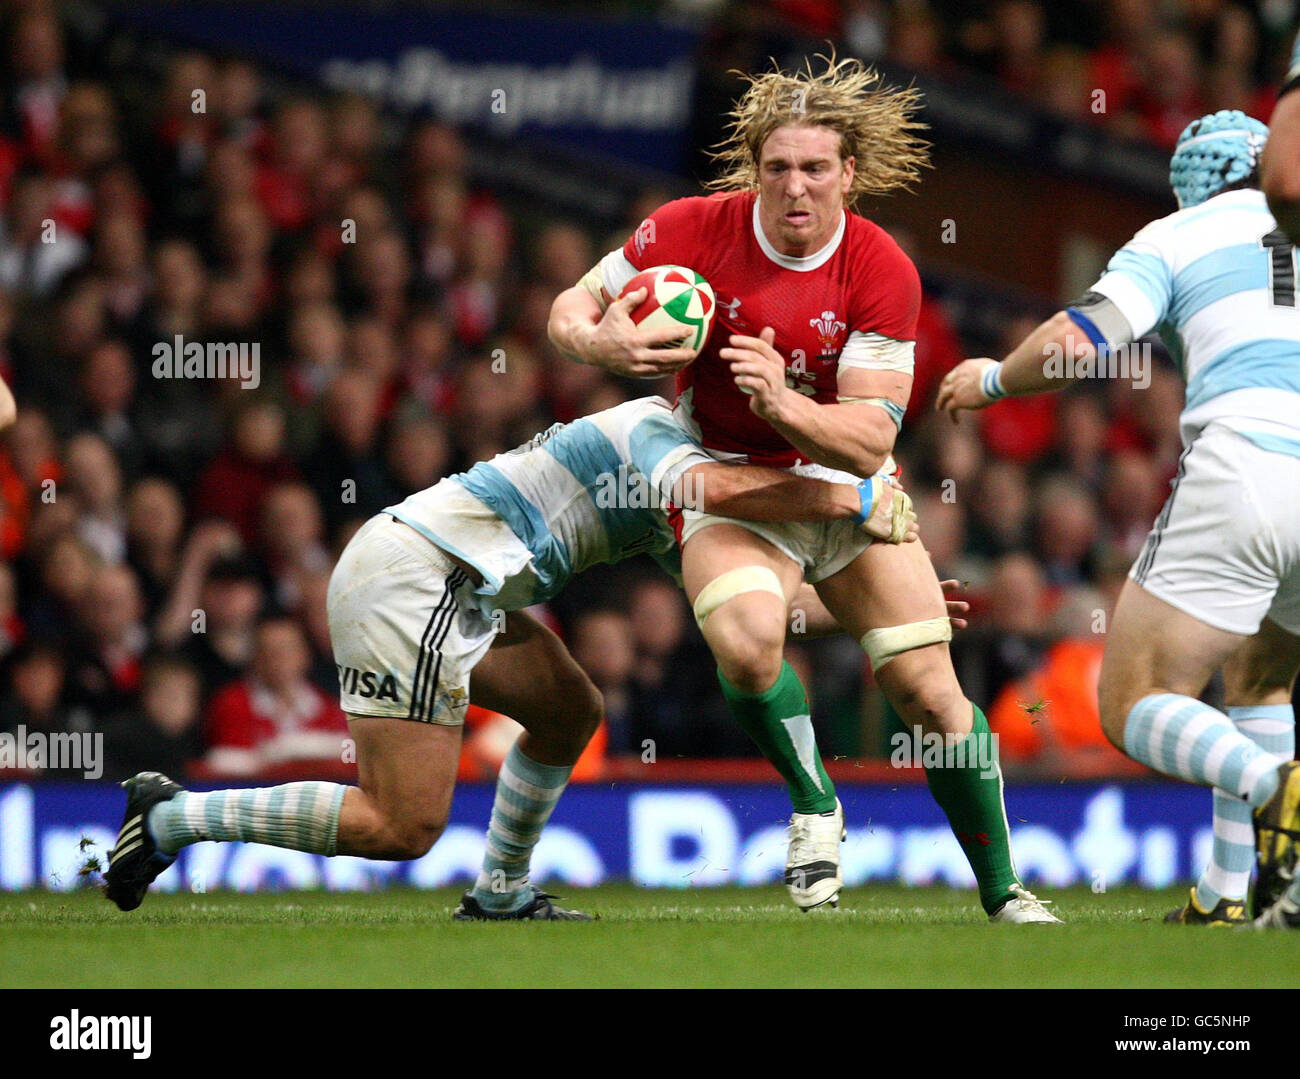 Rugby Union - Invesco Perpetual Series - Wales v Argentina - Millennium Stadium. Wales' Andy Powell is tackled by Argentina's Santiago Fernandez during the Invesco Perpetual Series match at the Millennium Stadium, Cardiff. Stock Photo